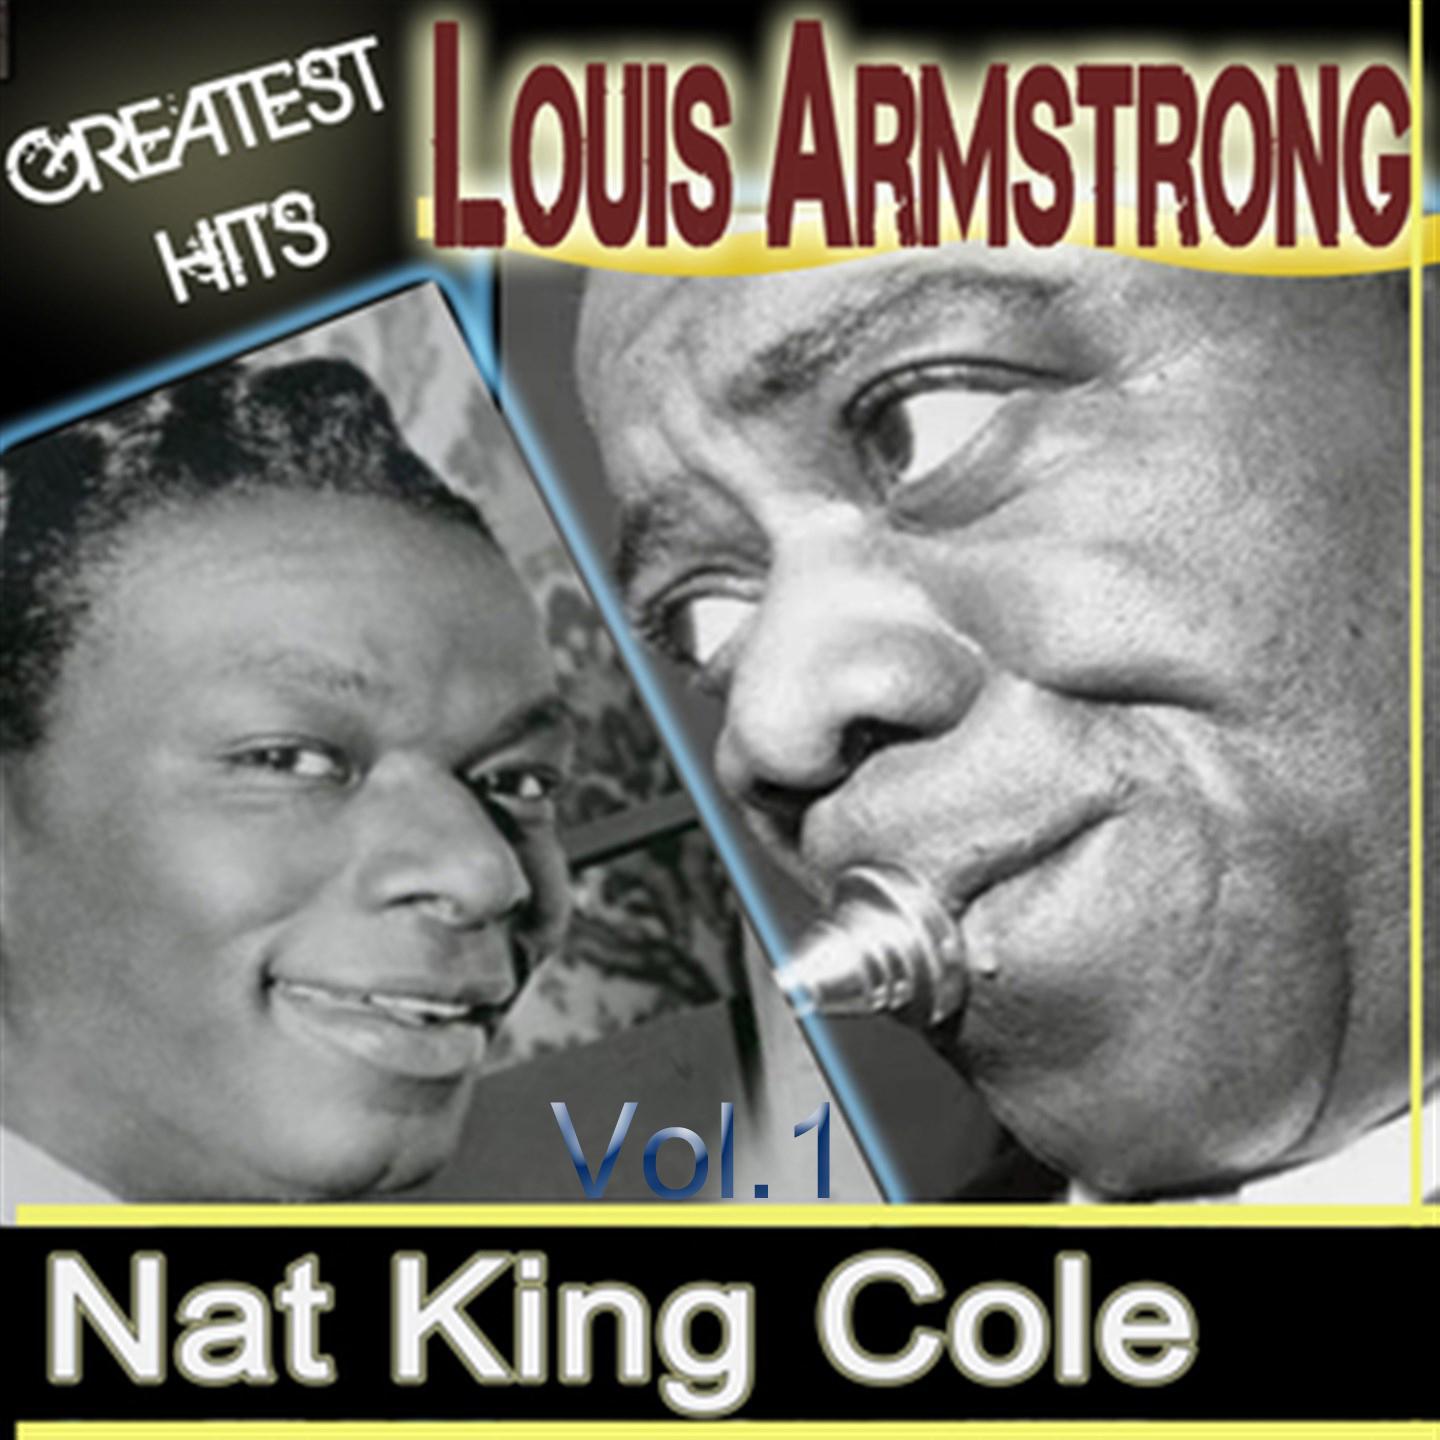 Louis Armstrong & Nat King Cole, Vol. 1 (Remastered)